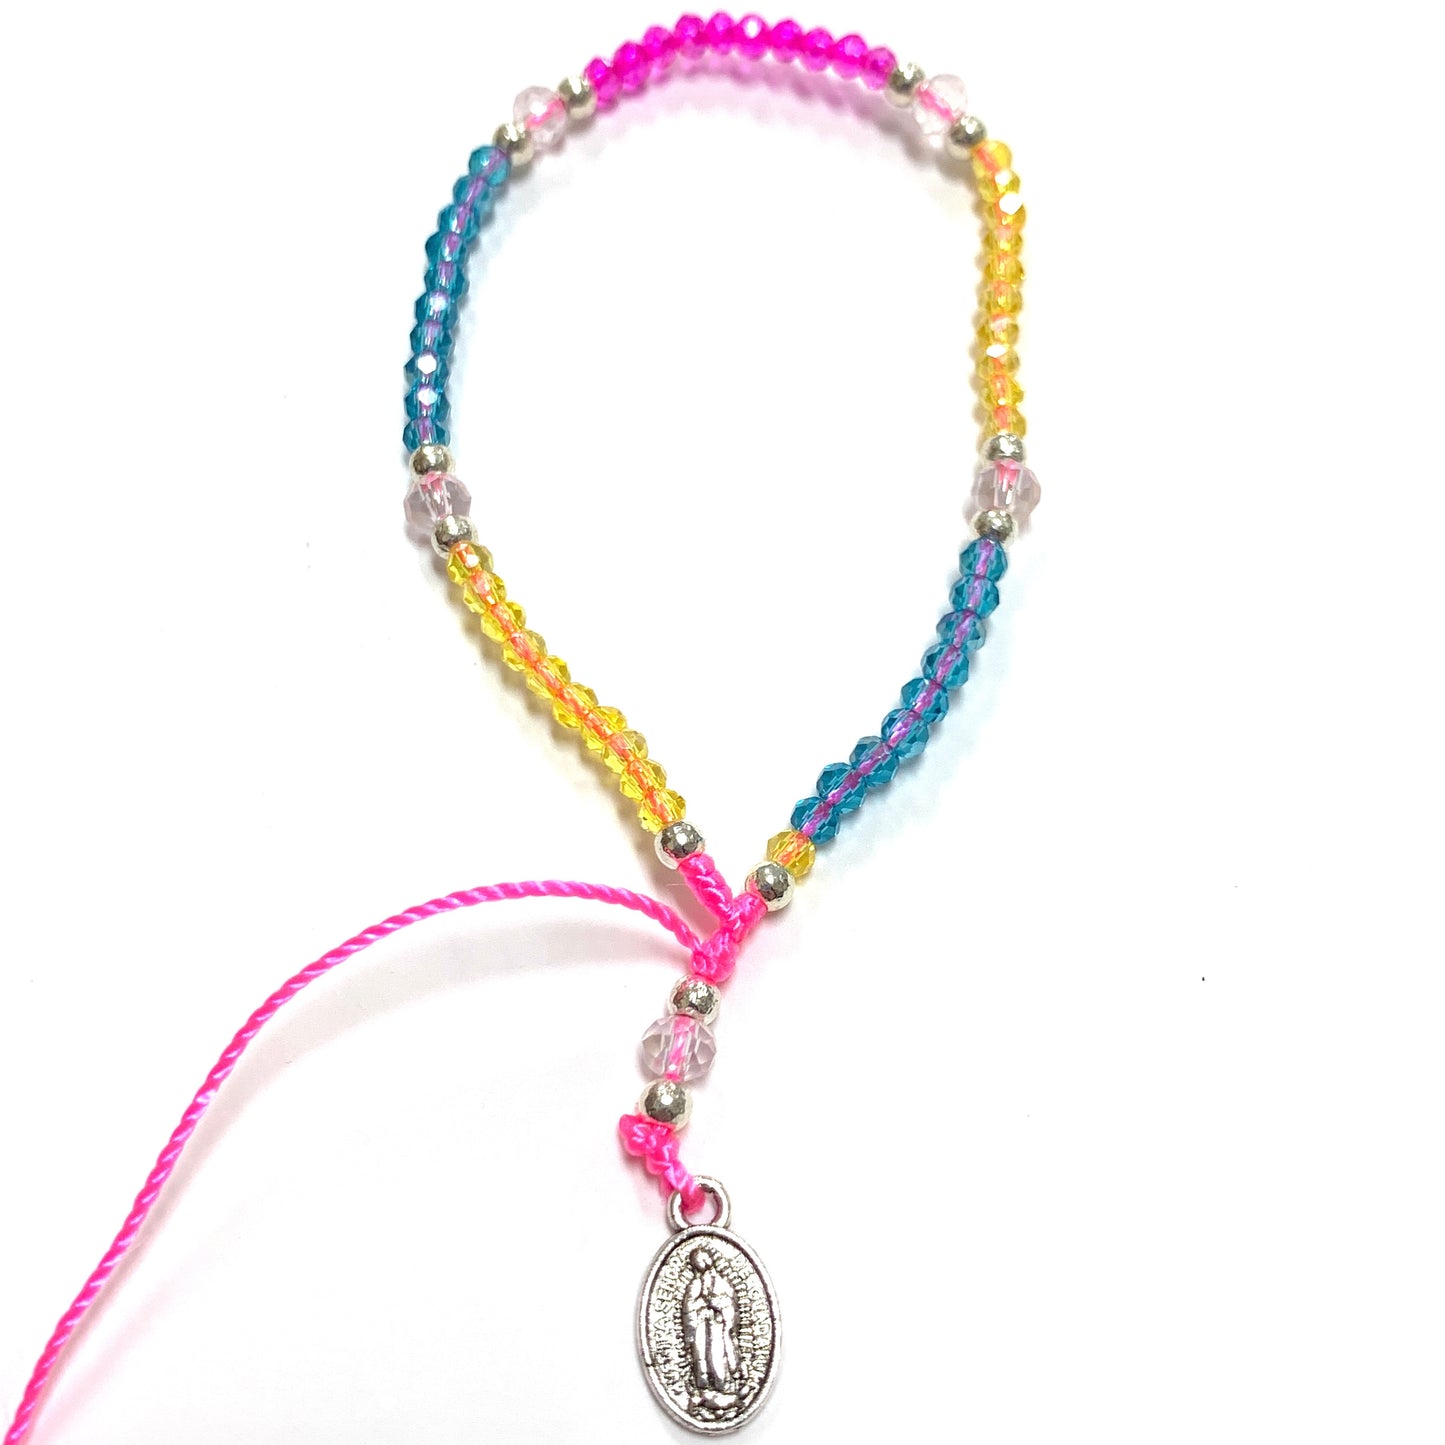 Mexican Rosary Bracelet of Assorted Colors and Medals